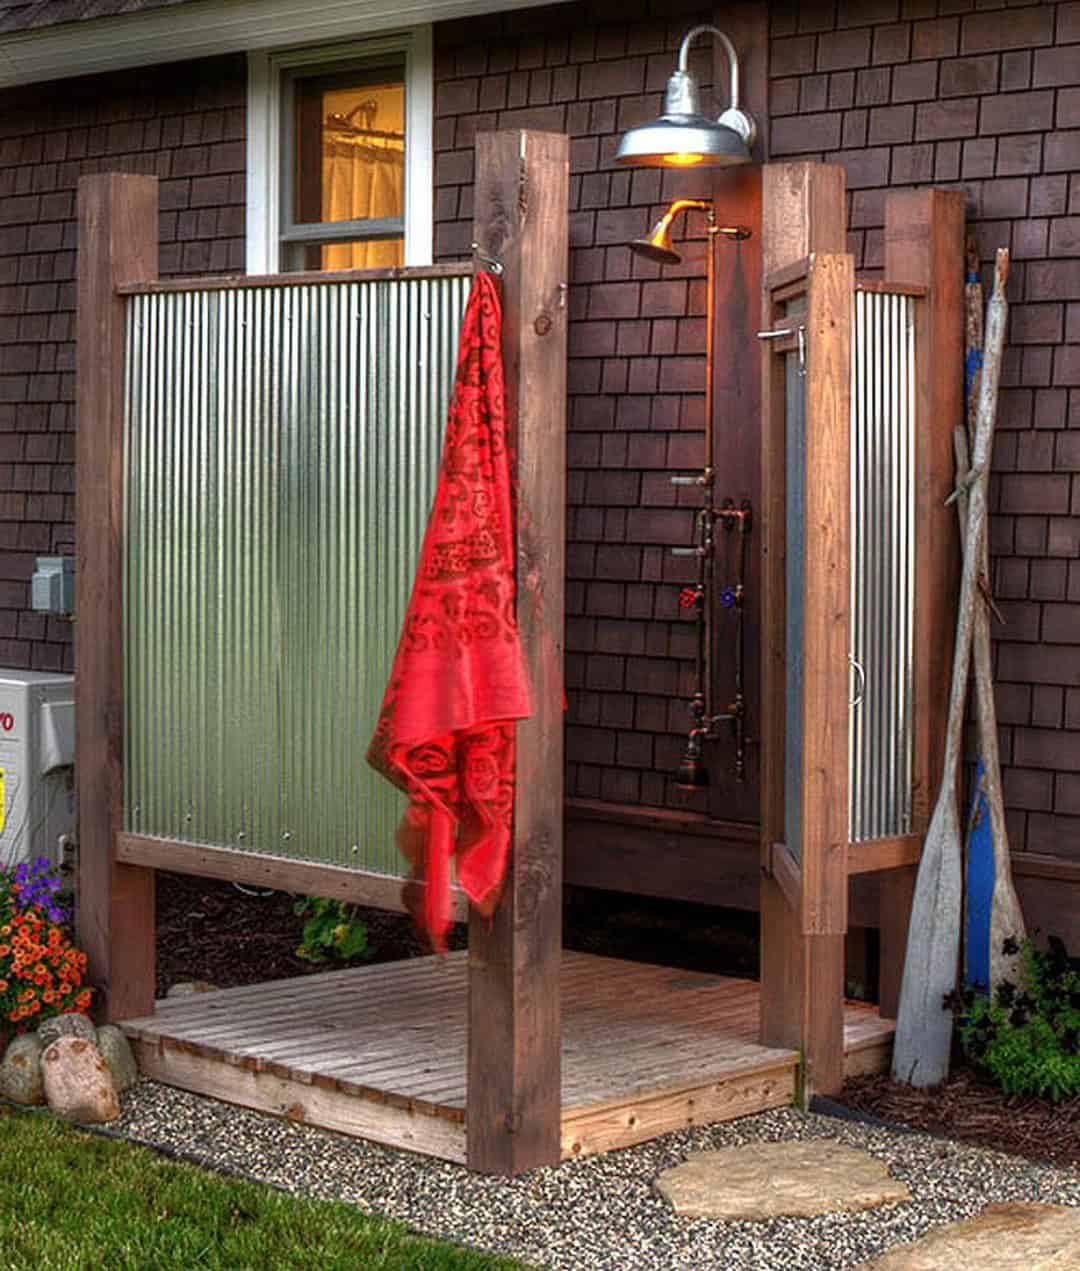 An outdoor shower with a red towel hanging on a wooden frame, a rustic door partially open, and garden flowers nearby, adjacent to a house with brown siding offers a great way to cool-off.